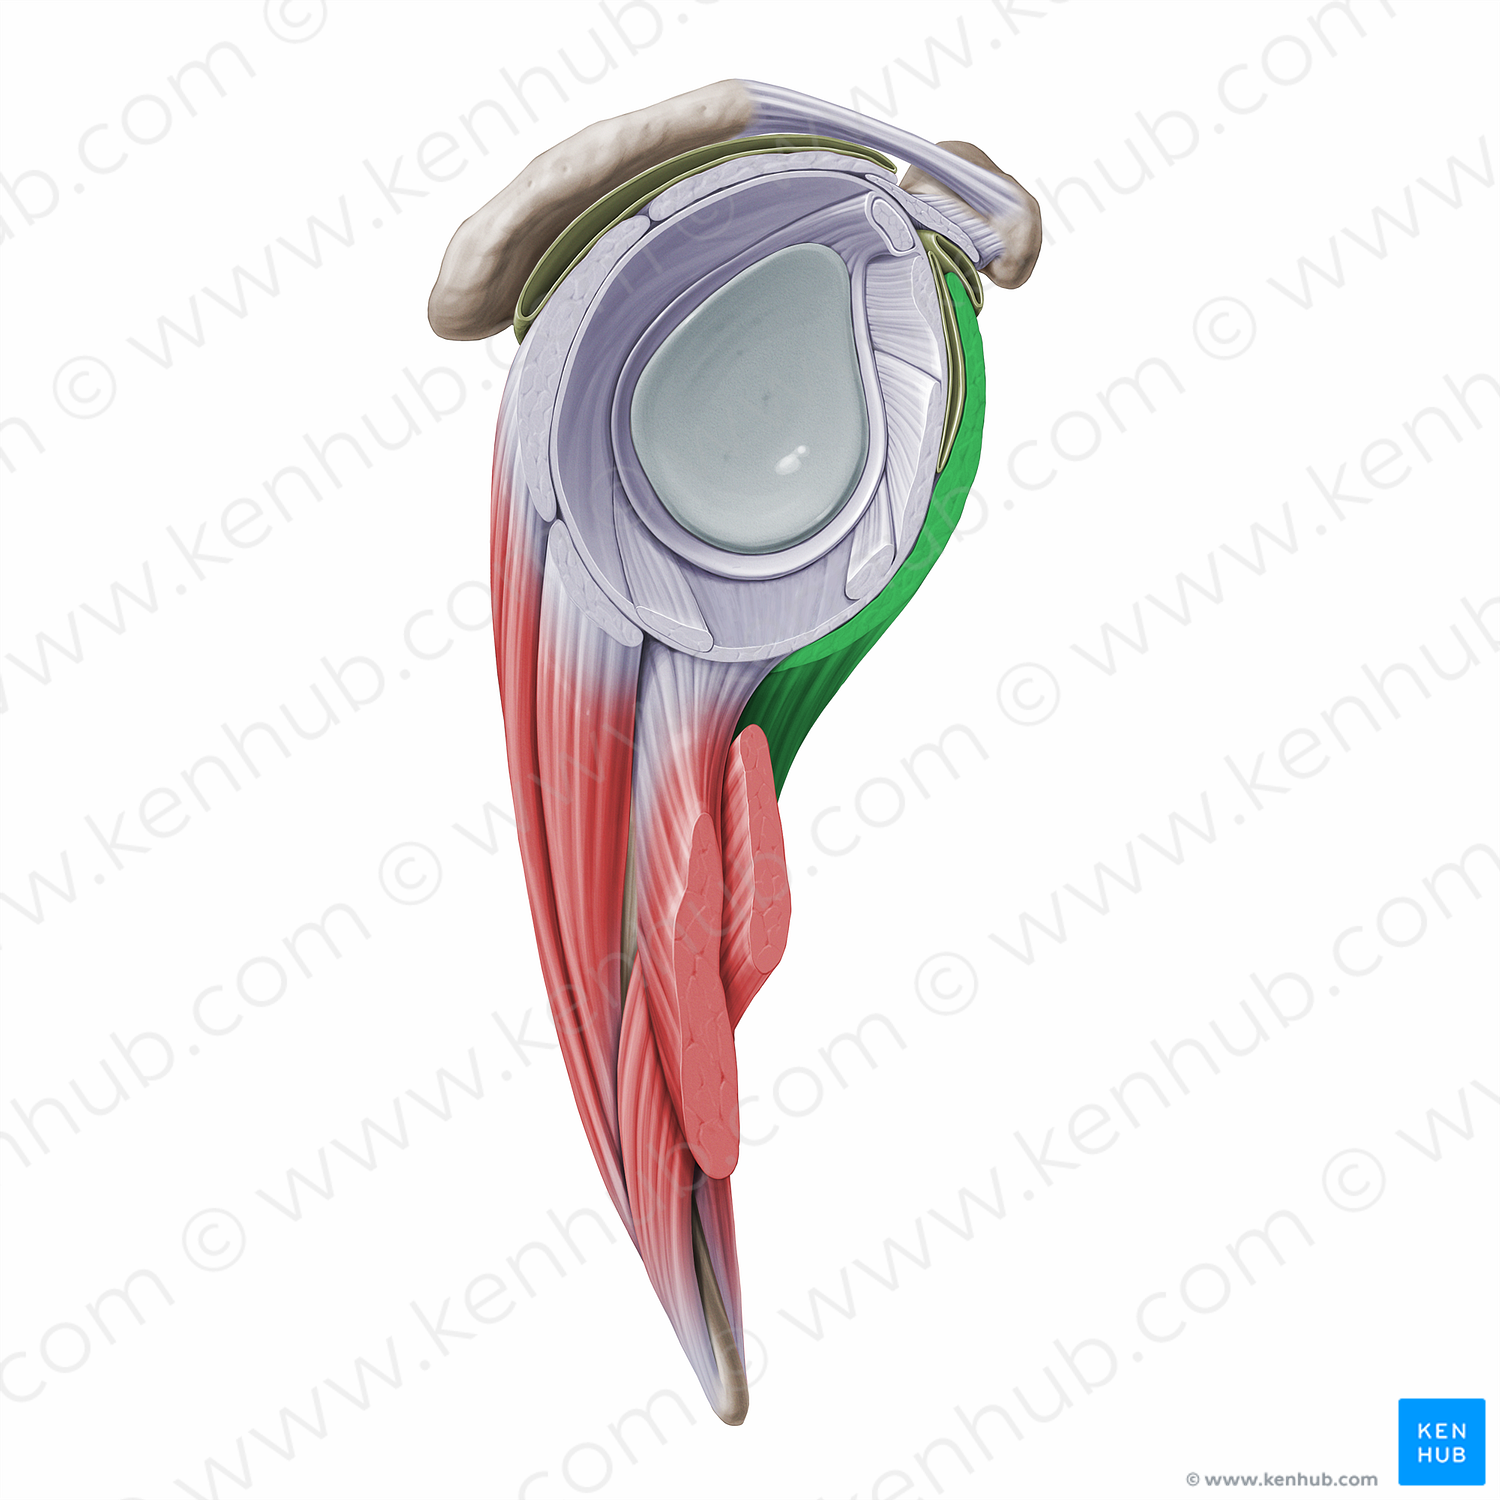 Subscapularis muscle (#16269)